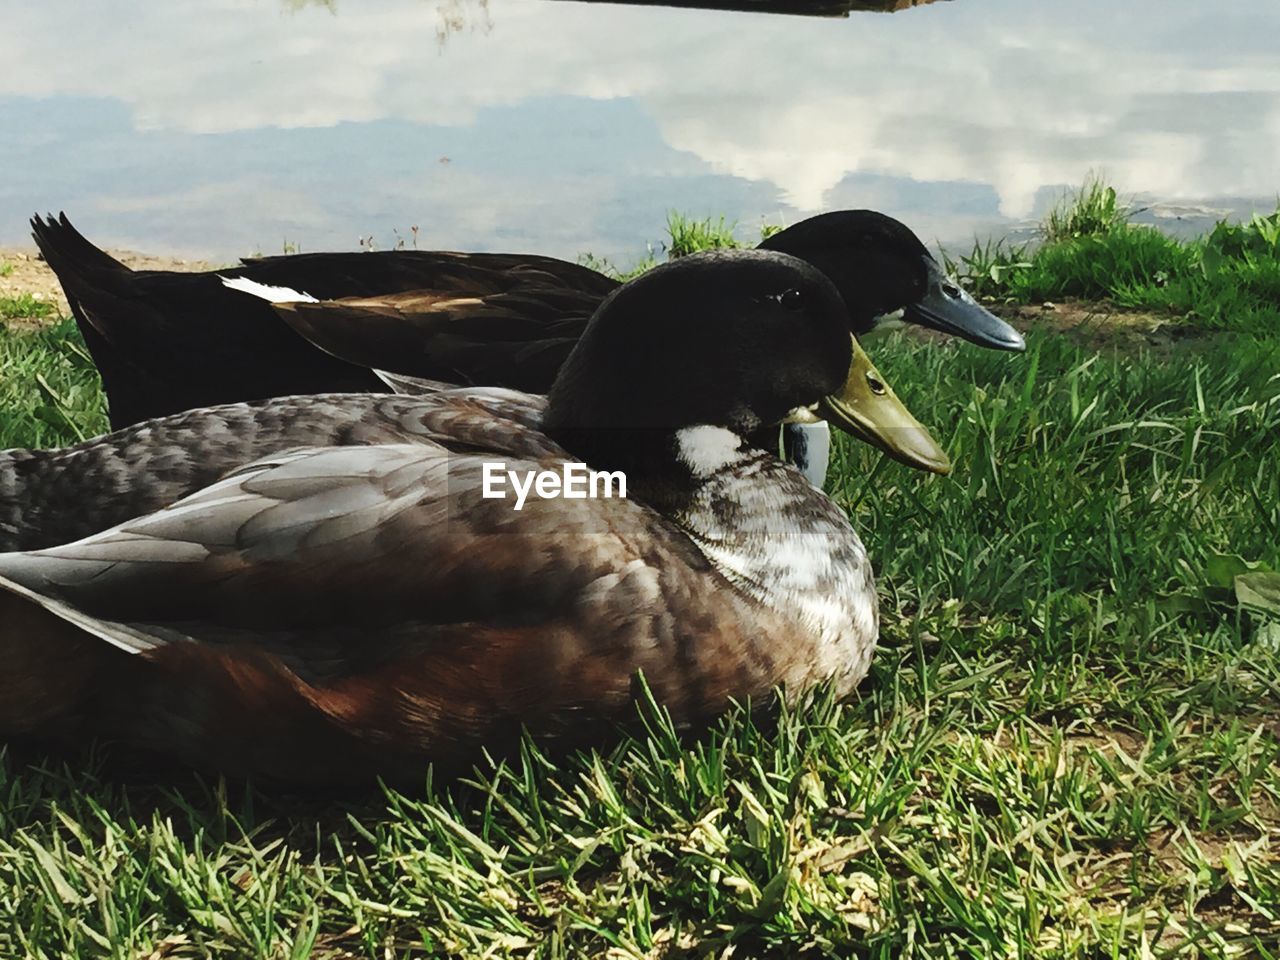 CLOSE-UP OF DUCKS ON GRASS AGAINST SKY